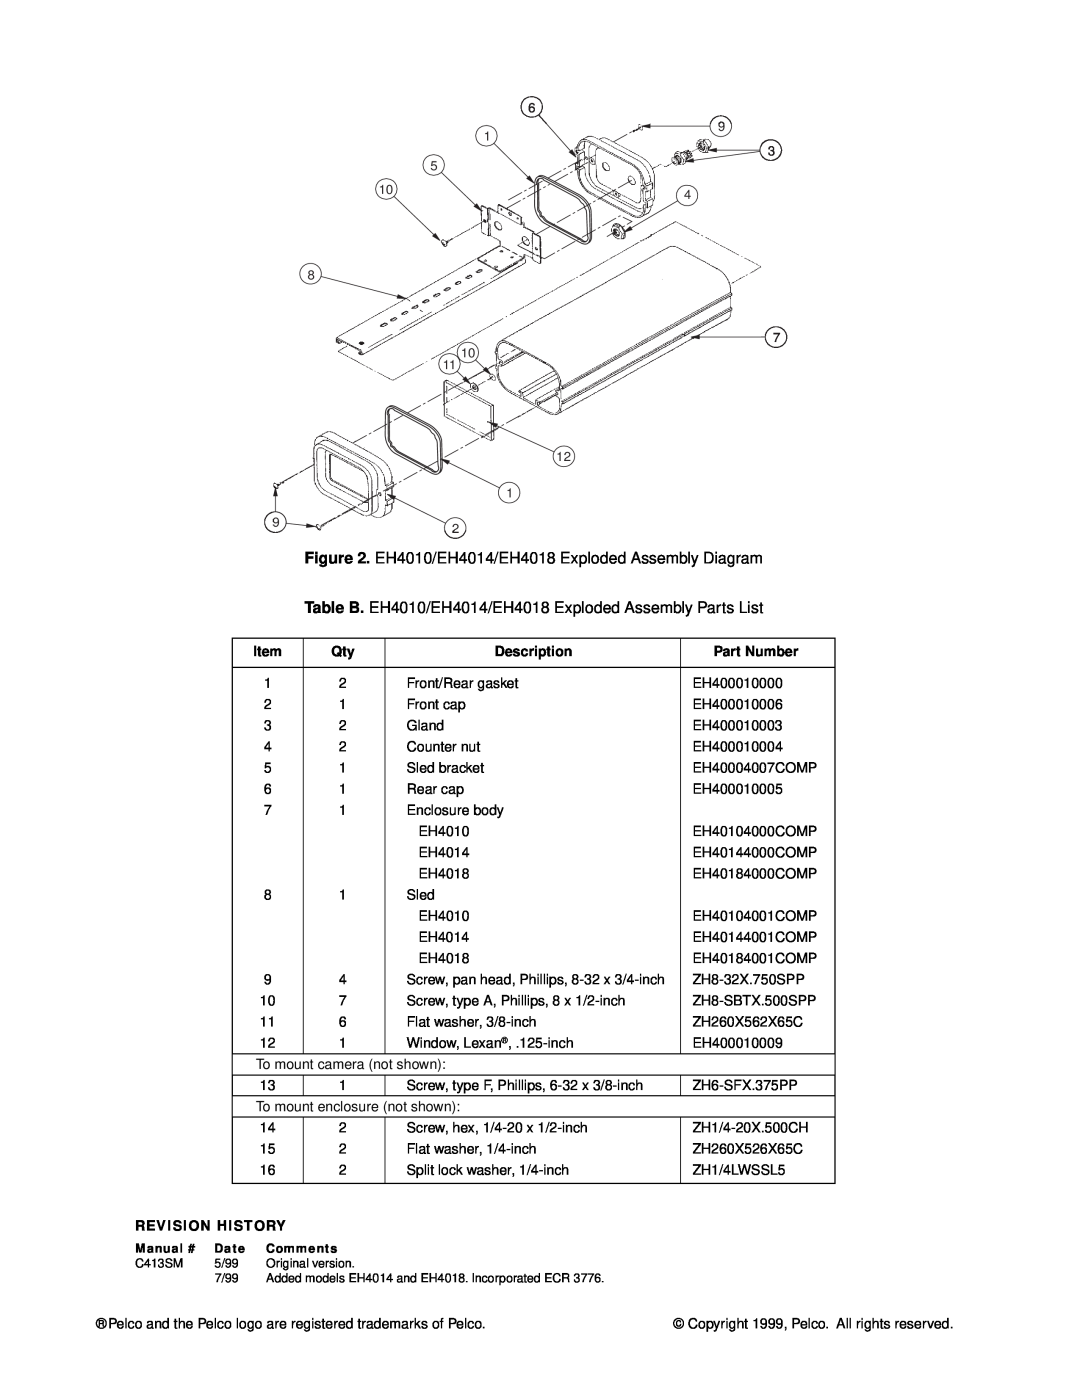 Pelco EH4018, EH4014, EH4010 service manual Revision History, Part Number 